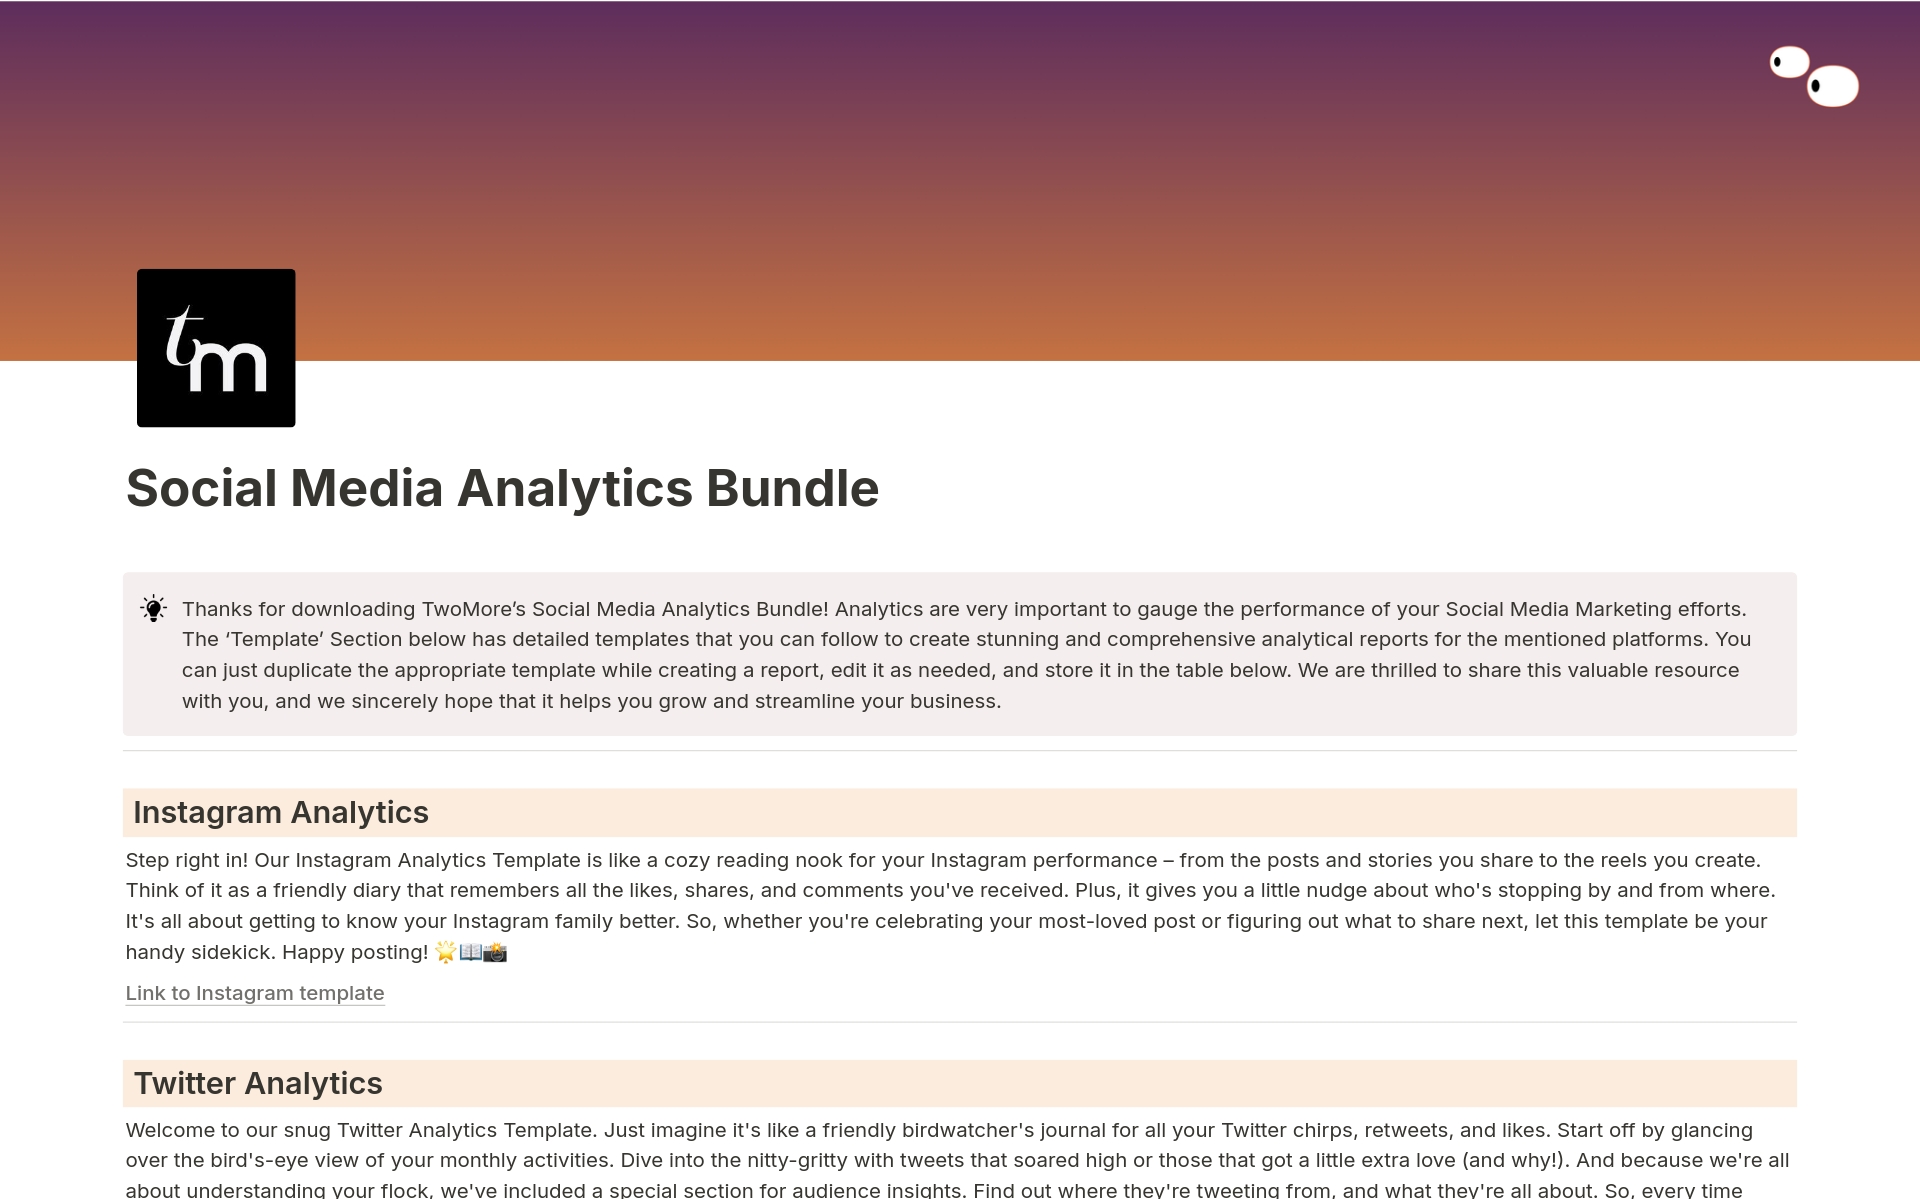 Boost your social media prowess with our Analytics Template Bundle, tailored for managers, influencers, and businesses eager to make data-driven decisions, track ROI, and optimize content across all platforms – your toolkit for measurable online success!